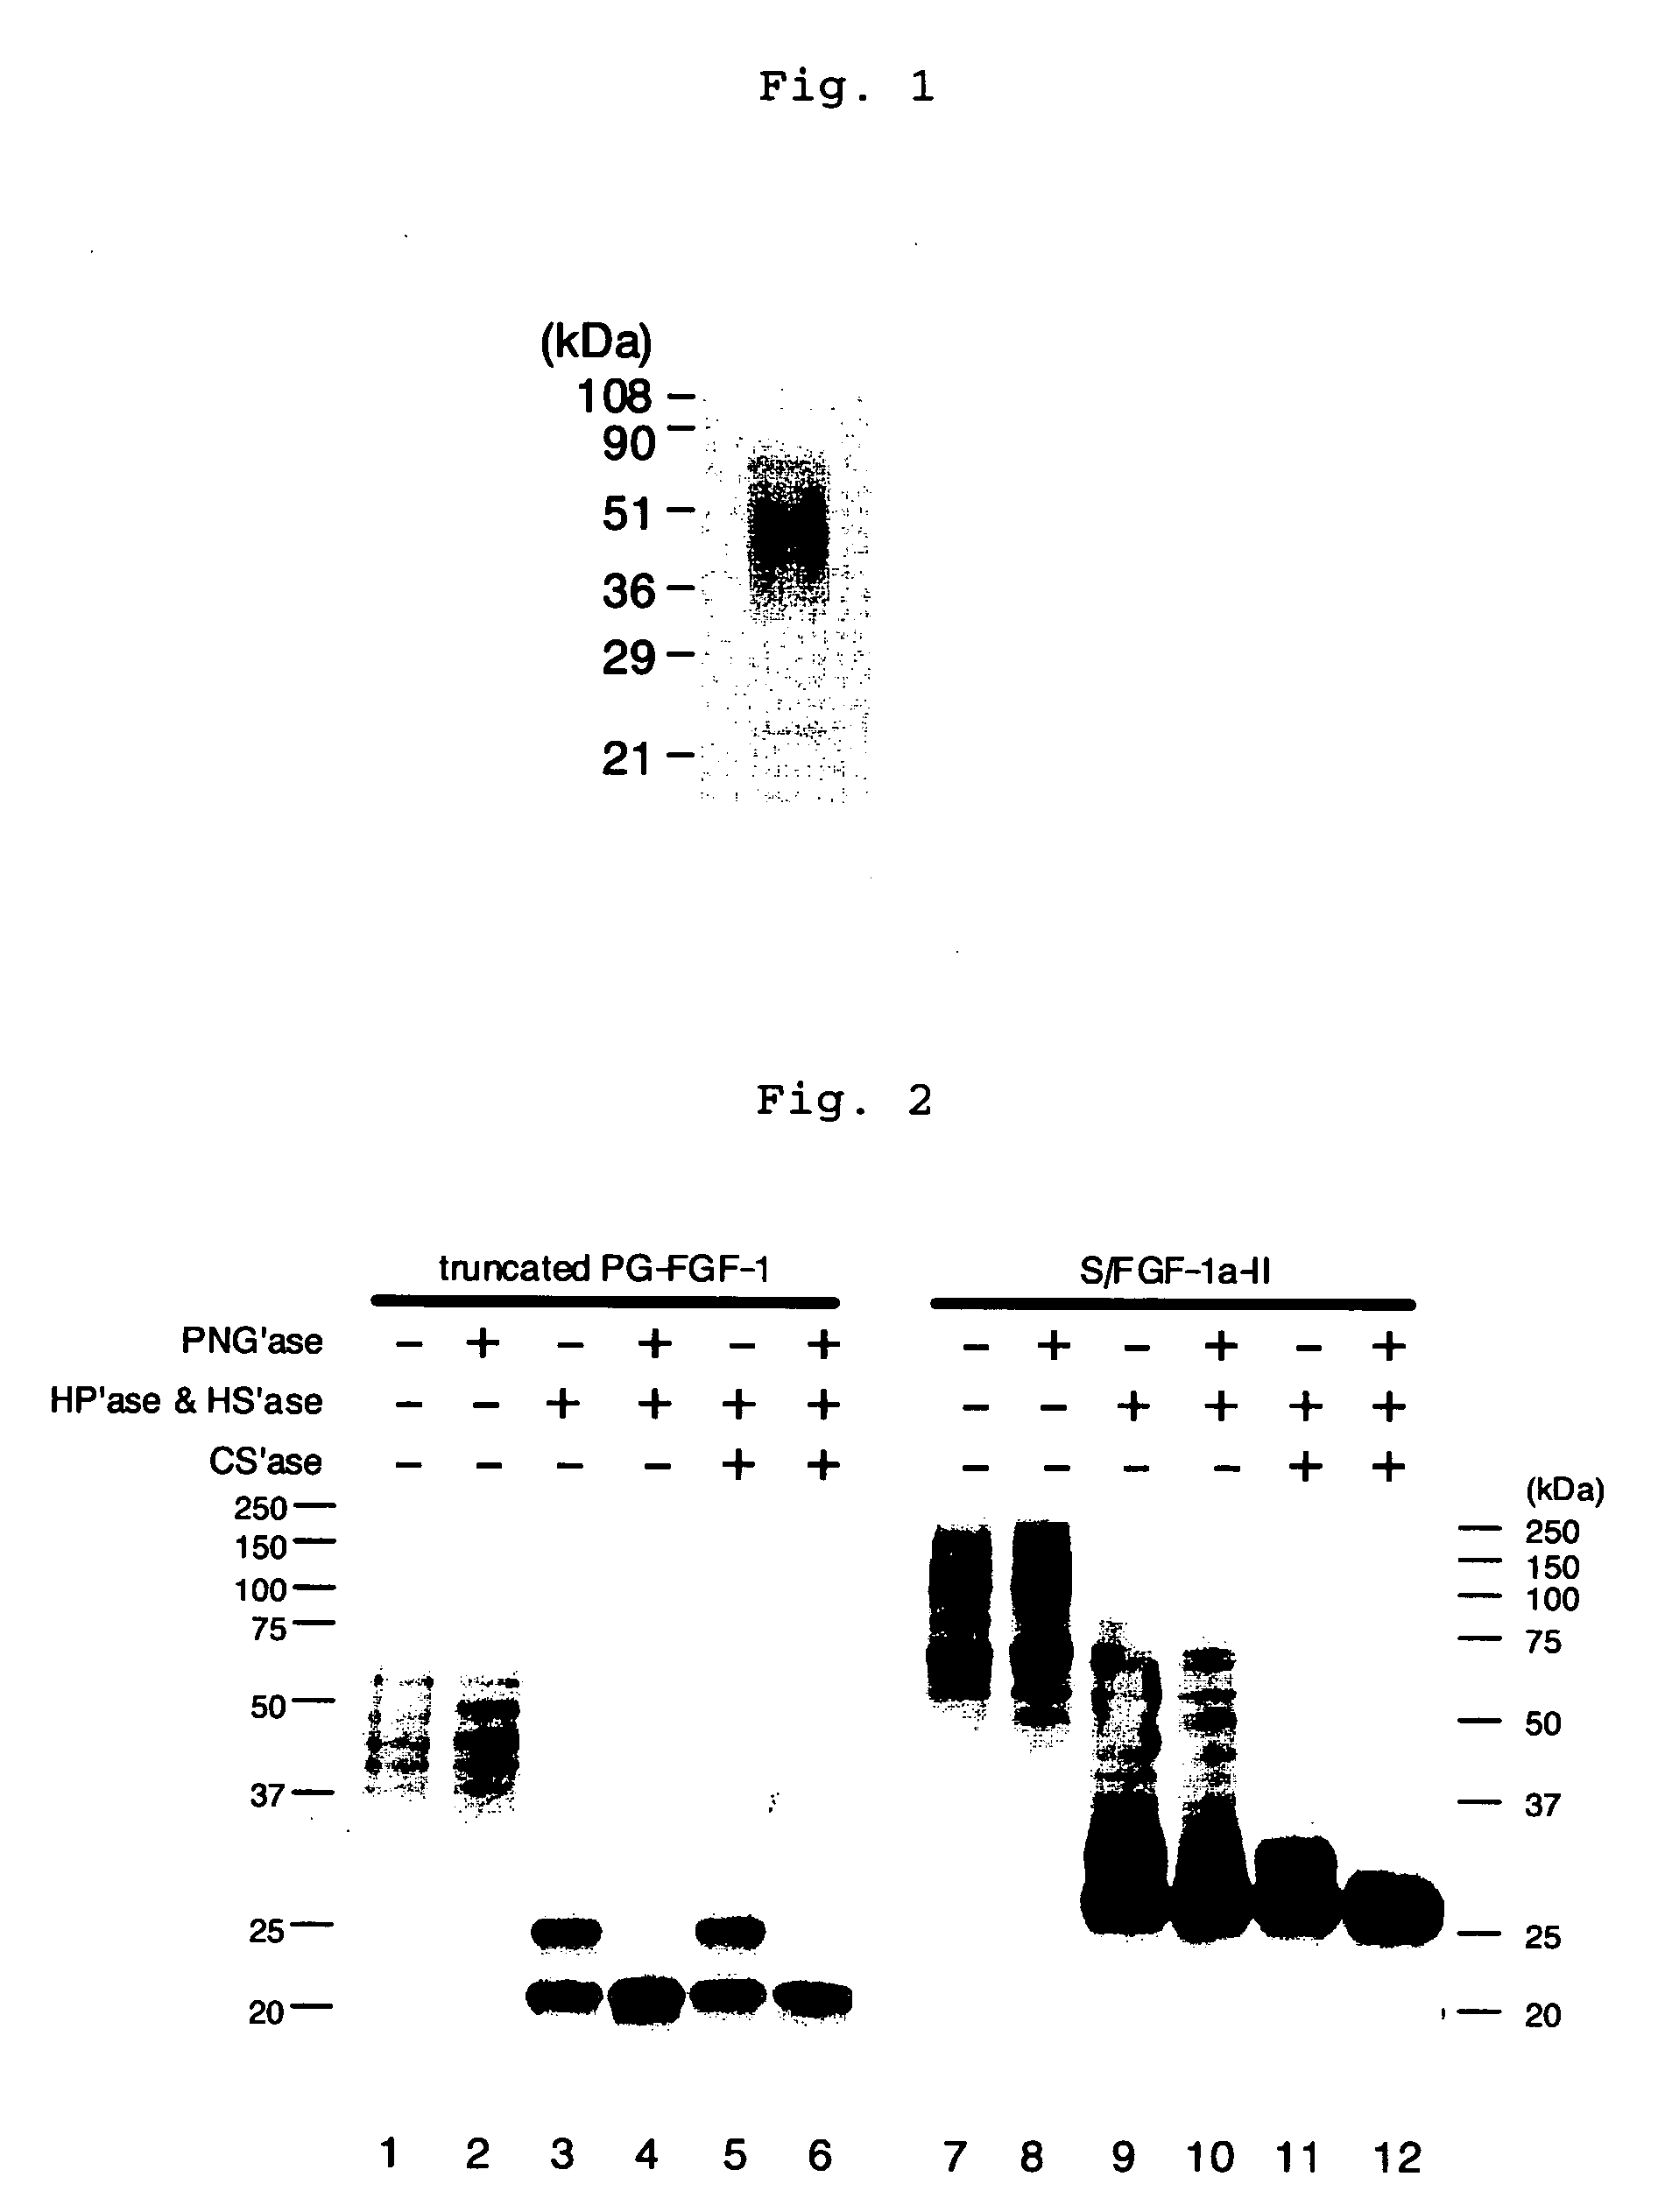 Haparin-Binding Protein Modified with Heparan Sulfate Sugar Chains, Process for Producing the Same and Pharmaceutical Compositions Containing the Same